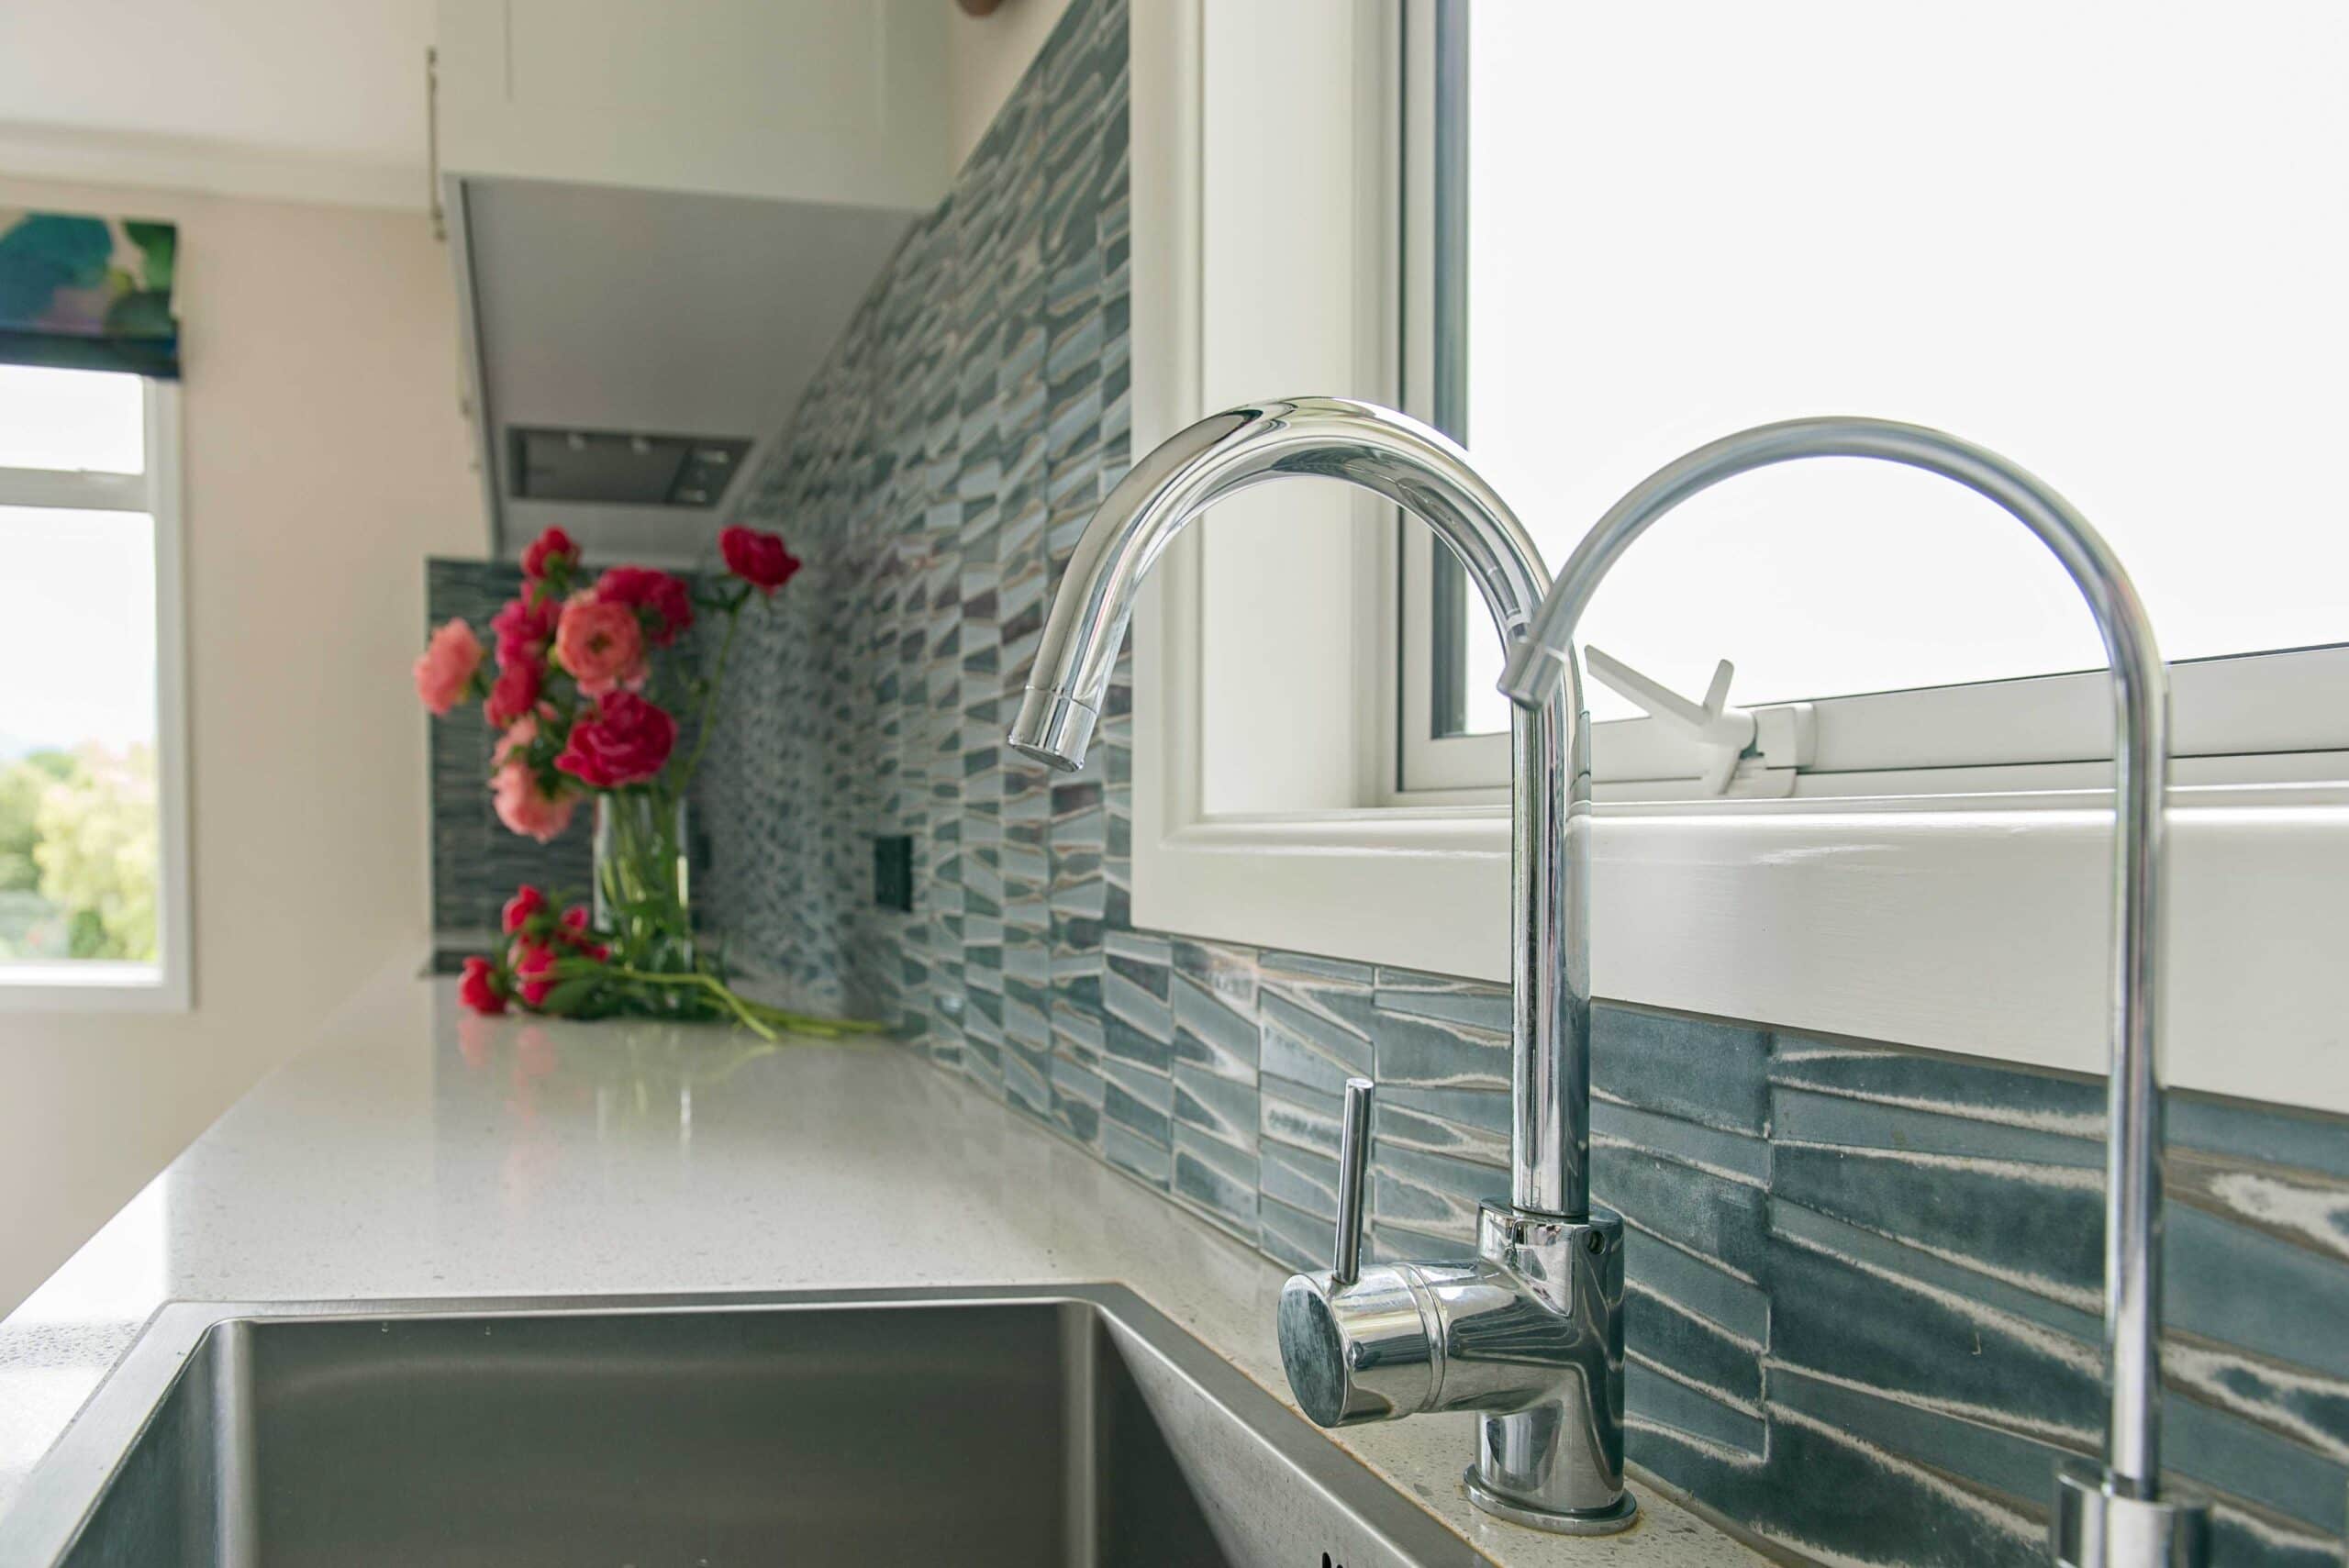 matching tap and water filter in this stone benchtop